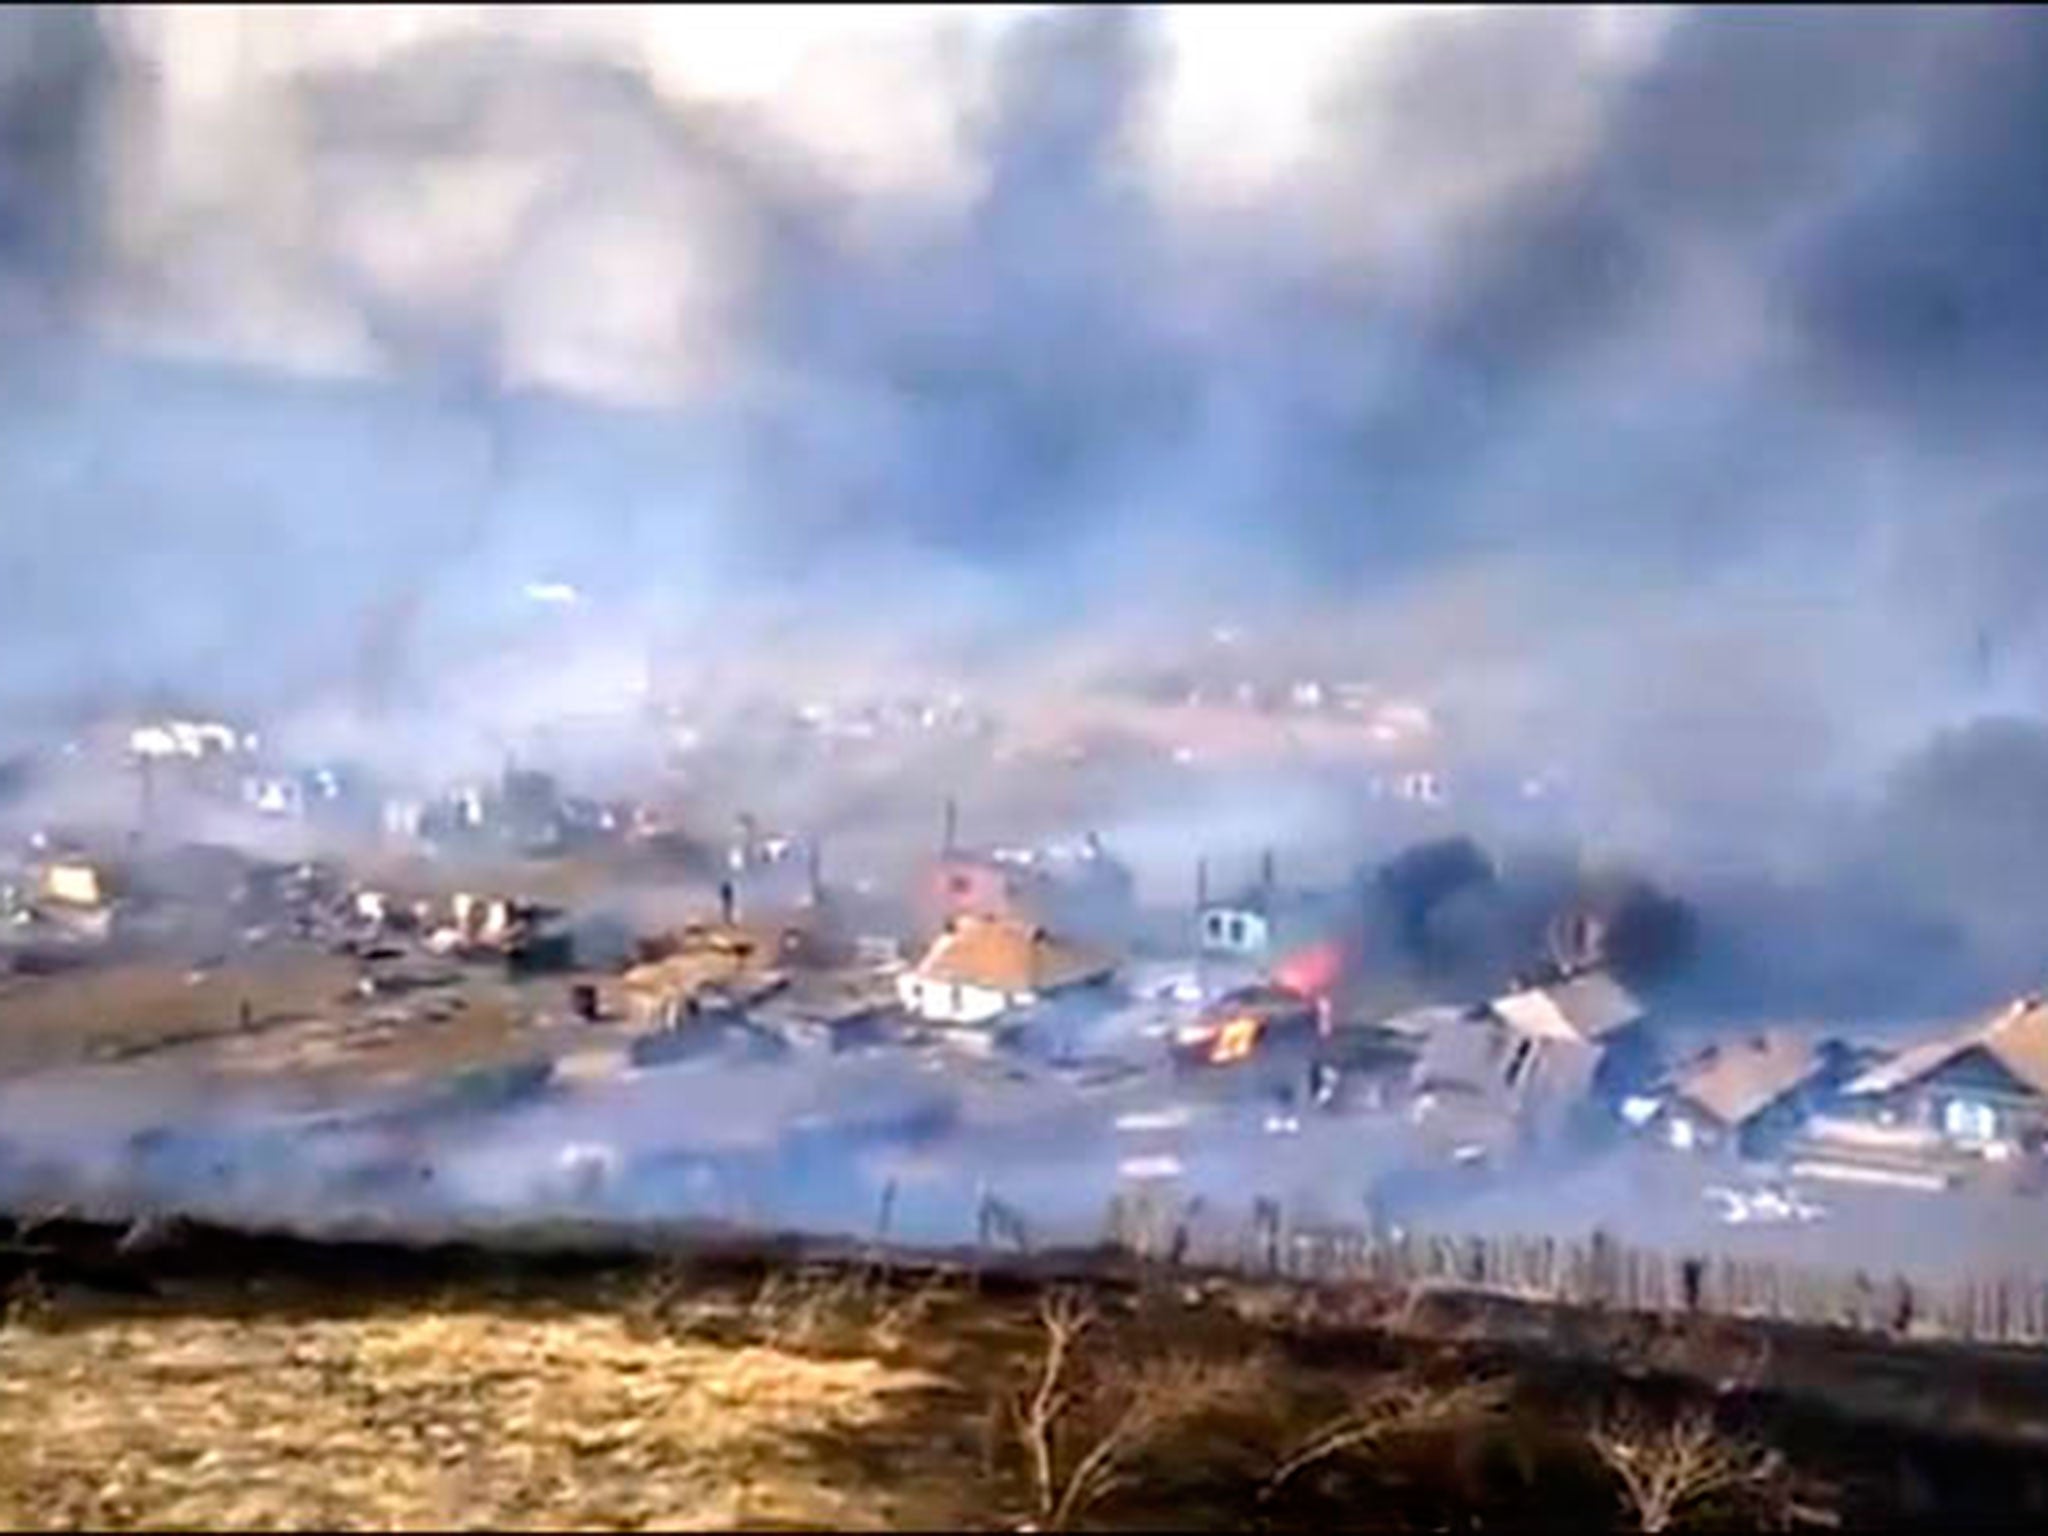 40 towns and villages were affected by the massive blaze